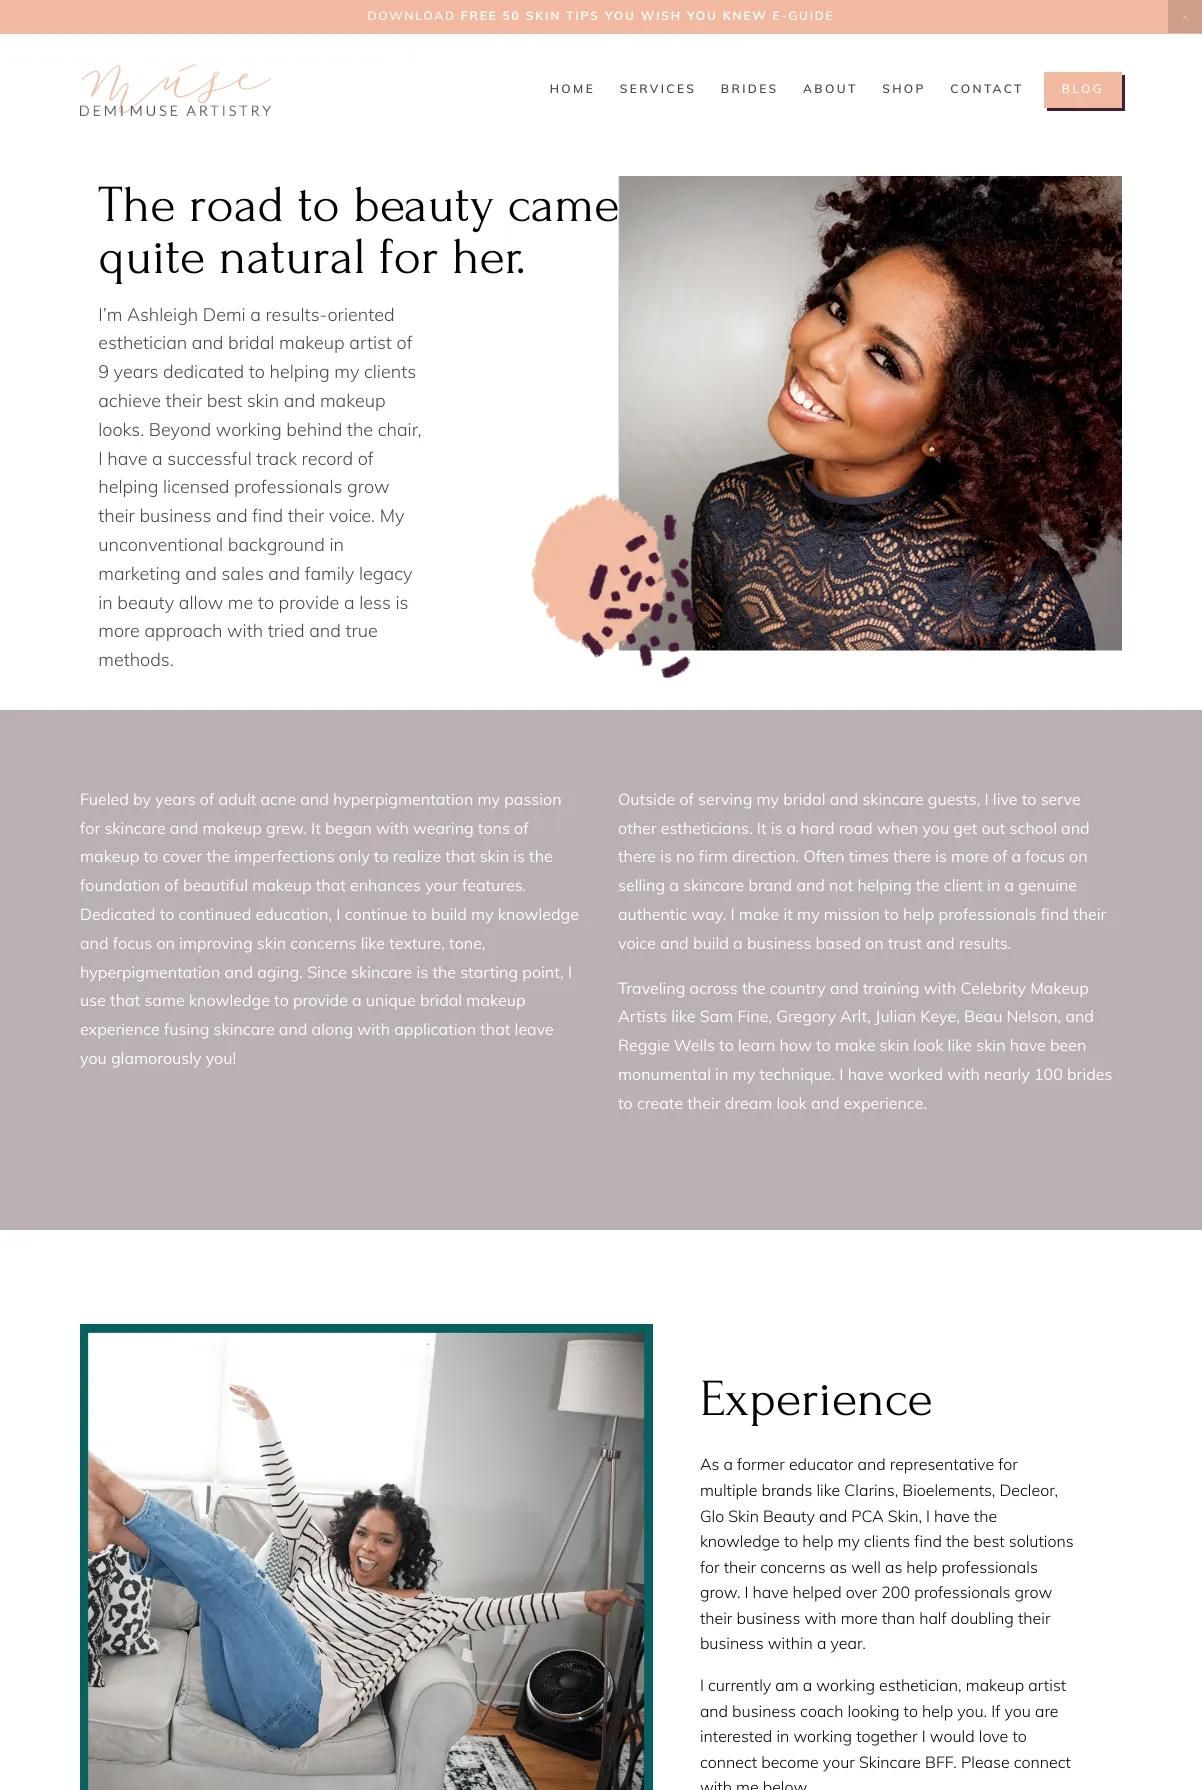 Screenshot 3 of Demi Muse Artistry (Example Squarespace Esthetician Website)